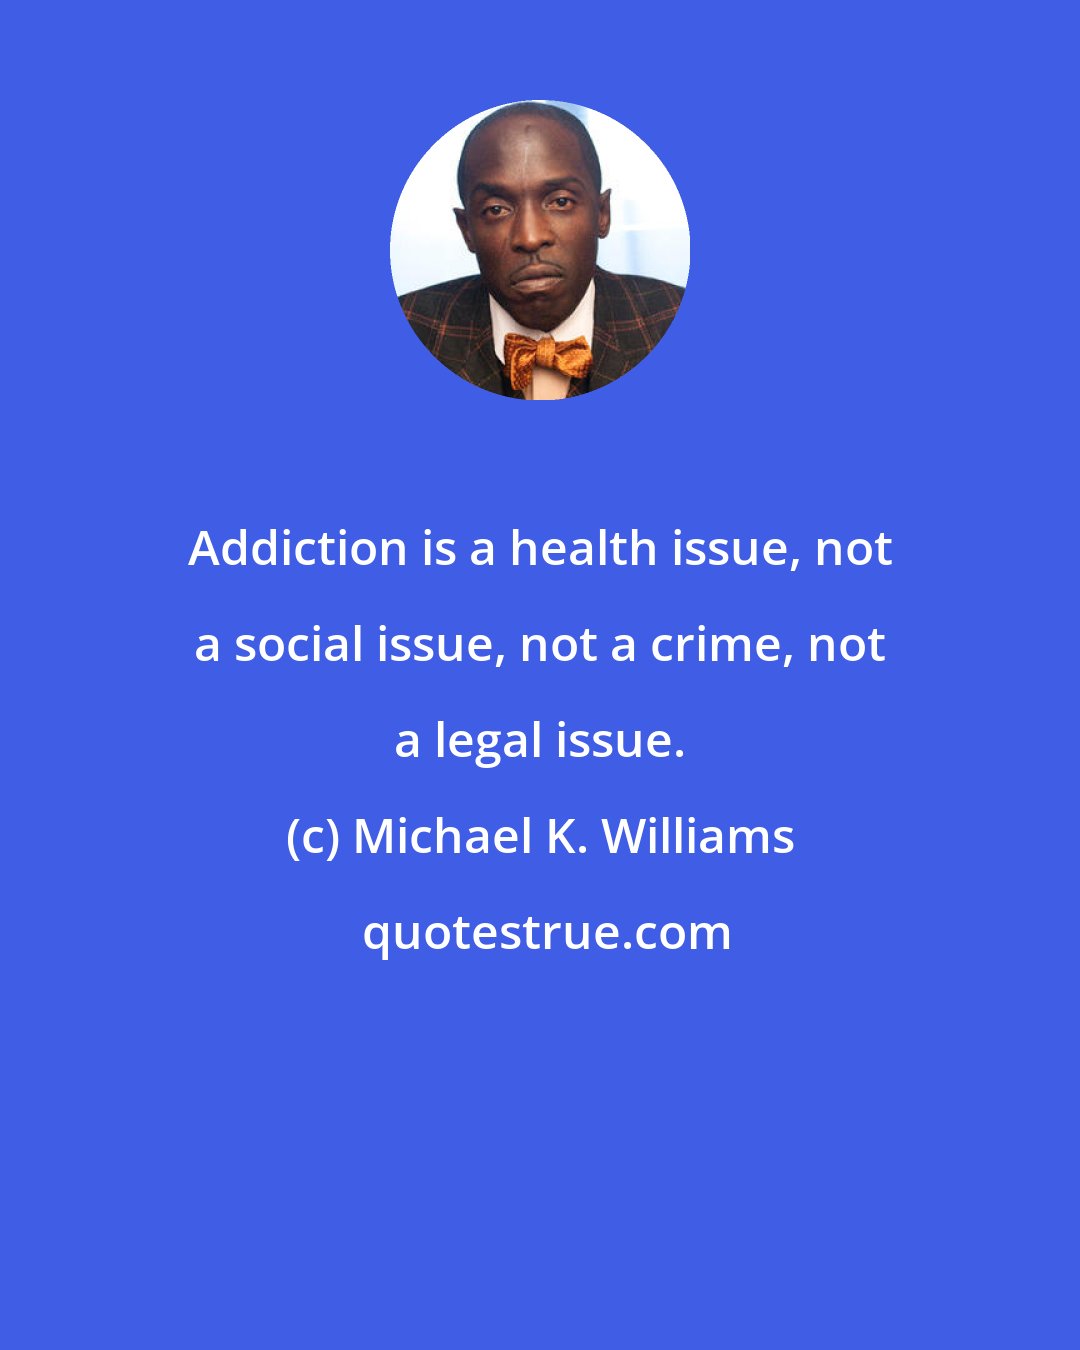 Michael K. Williams: Addiction is a health issue, not a social issue, not a crime, not a legal issue.